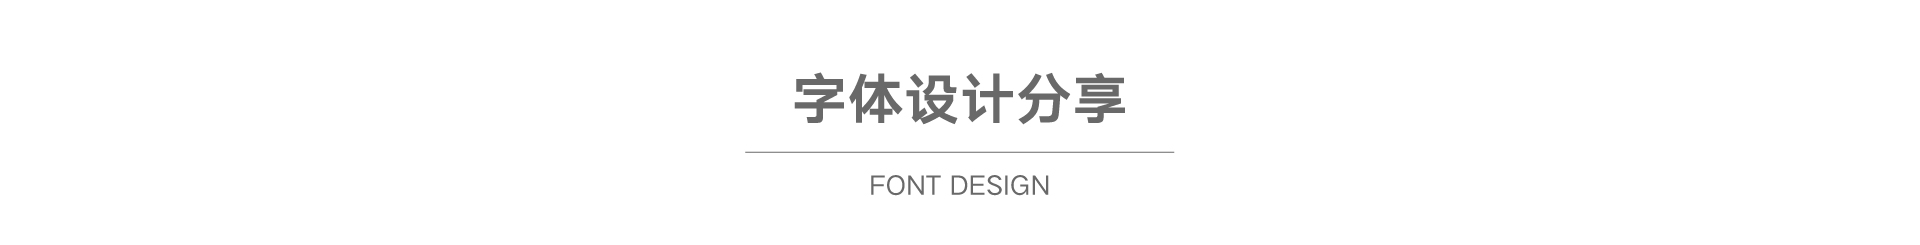 [Tutorial Sharing] Font Design Experience